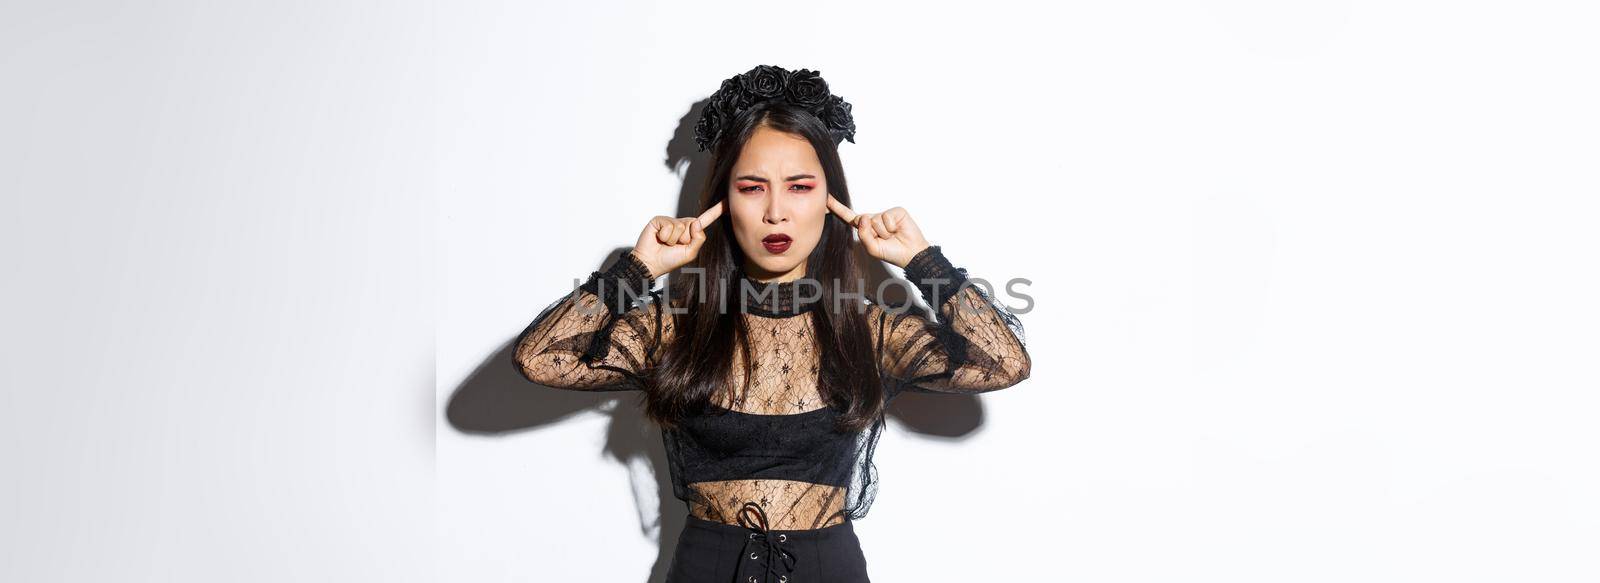 Annoyed and mad asian woman in witch halloween costume shut ears and frowning angry, standing bothered by something loud, complaining on noise over white background.